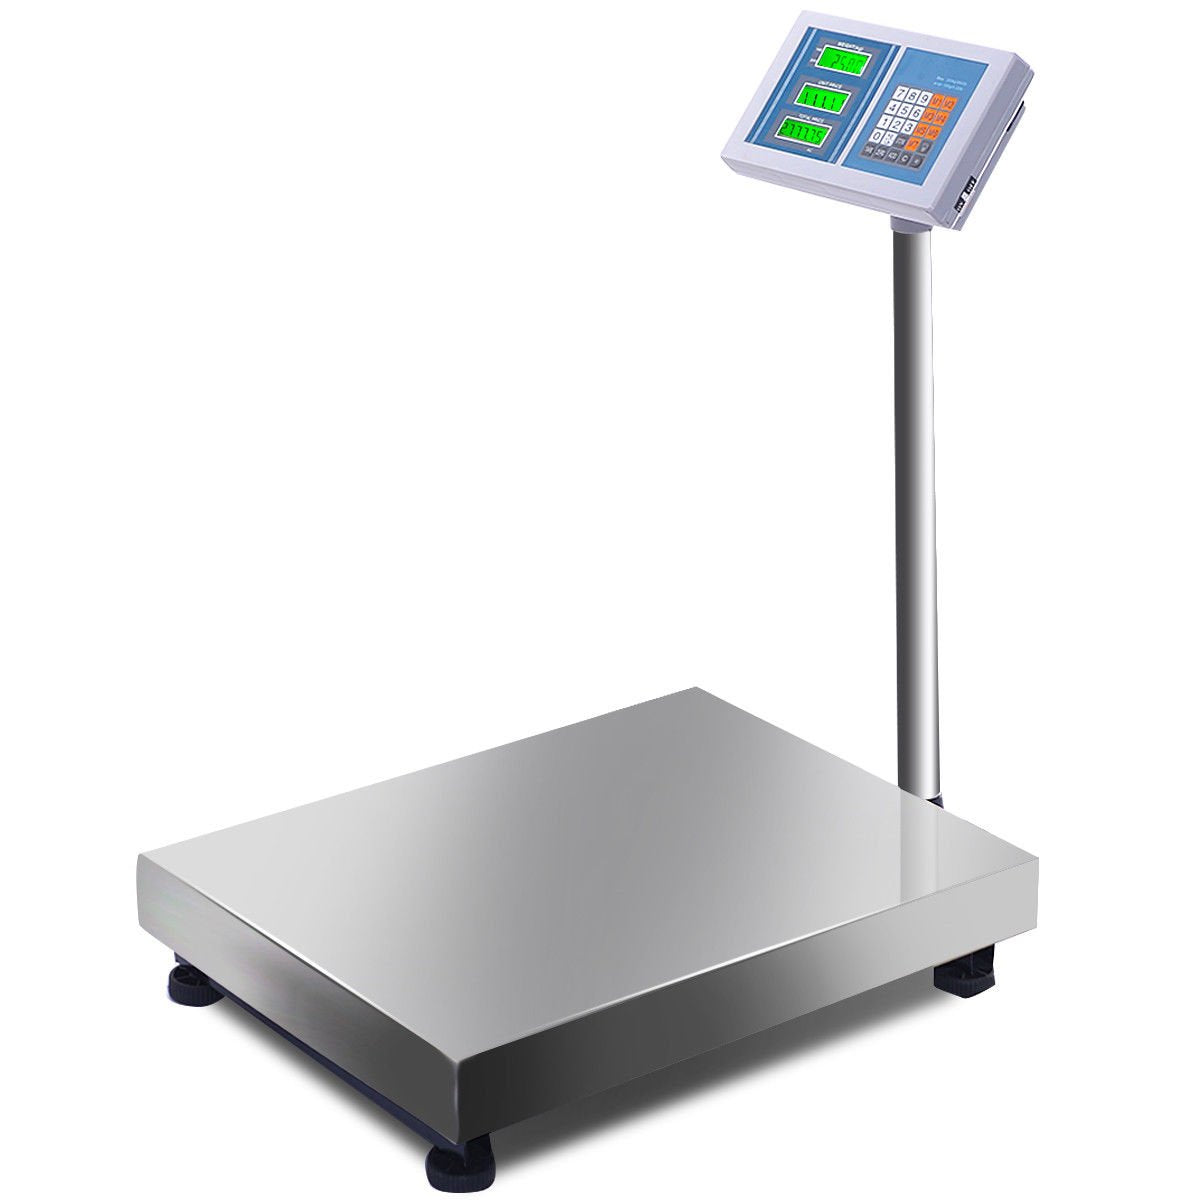 PCR-3115 300 Kg Electronic Floor Scale Heavy Duty 660 Lb x 0.1 Lb Postal  Scale LCD Digital Platform Weight Scale Balance Measuring Tool,Scale